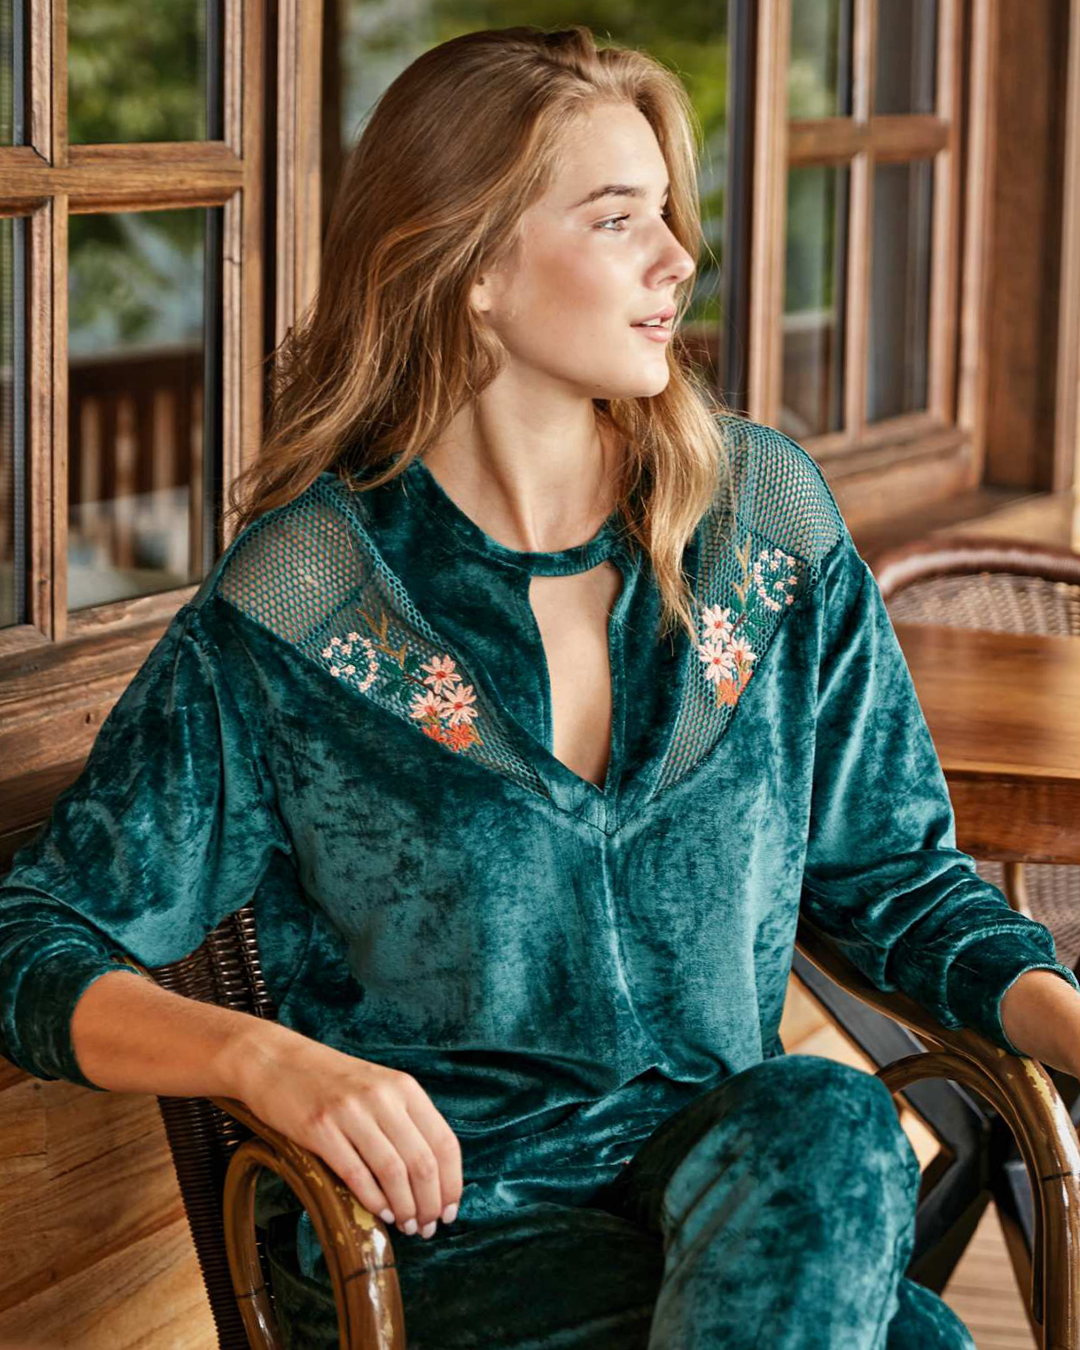 Women's pajama embroidered with lace flowers on the shoulder